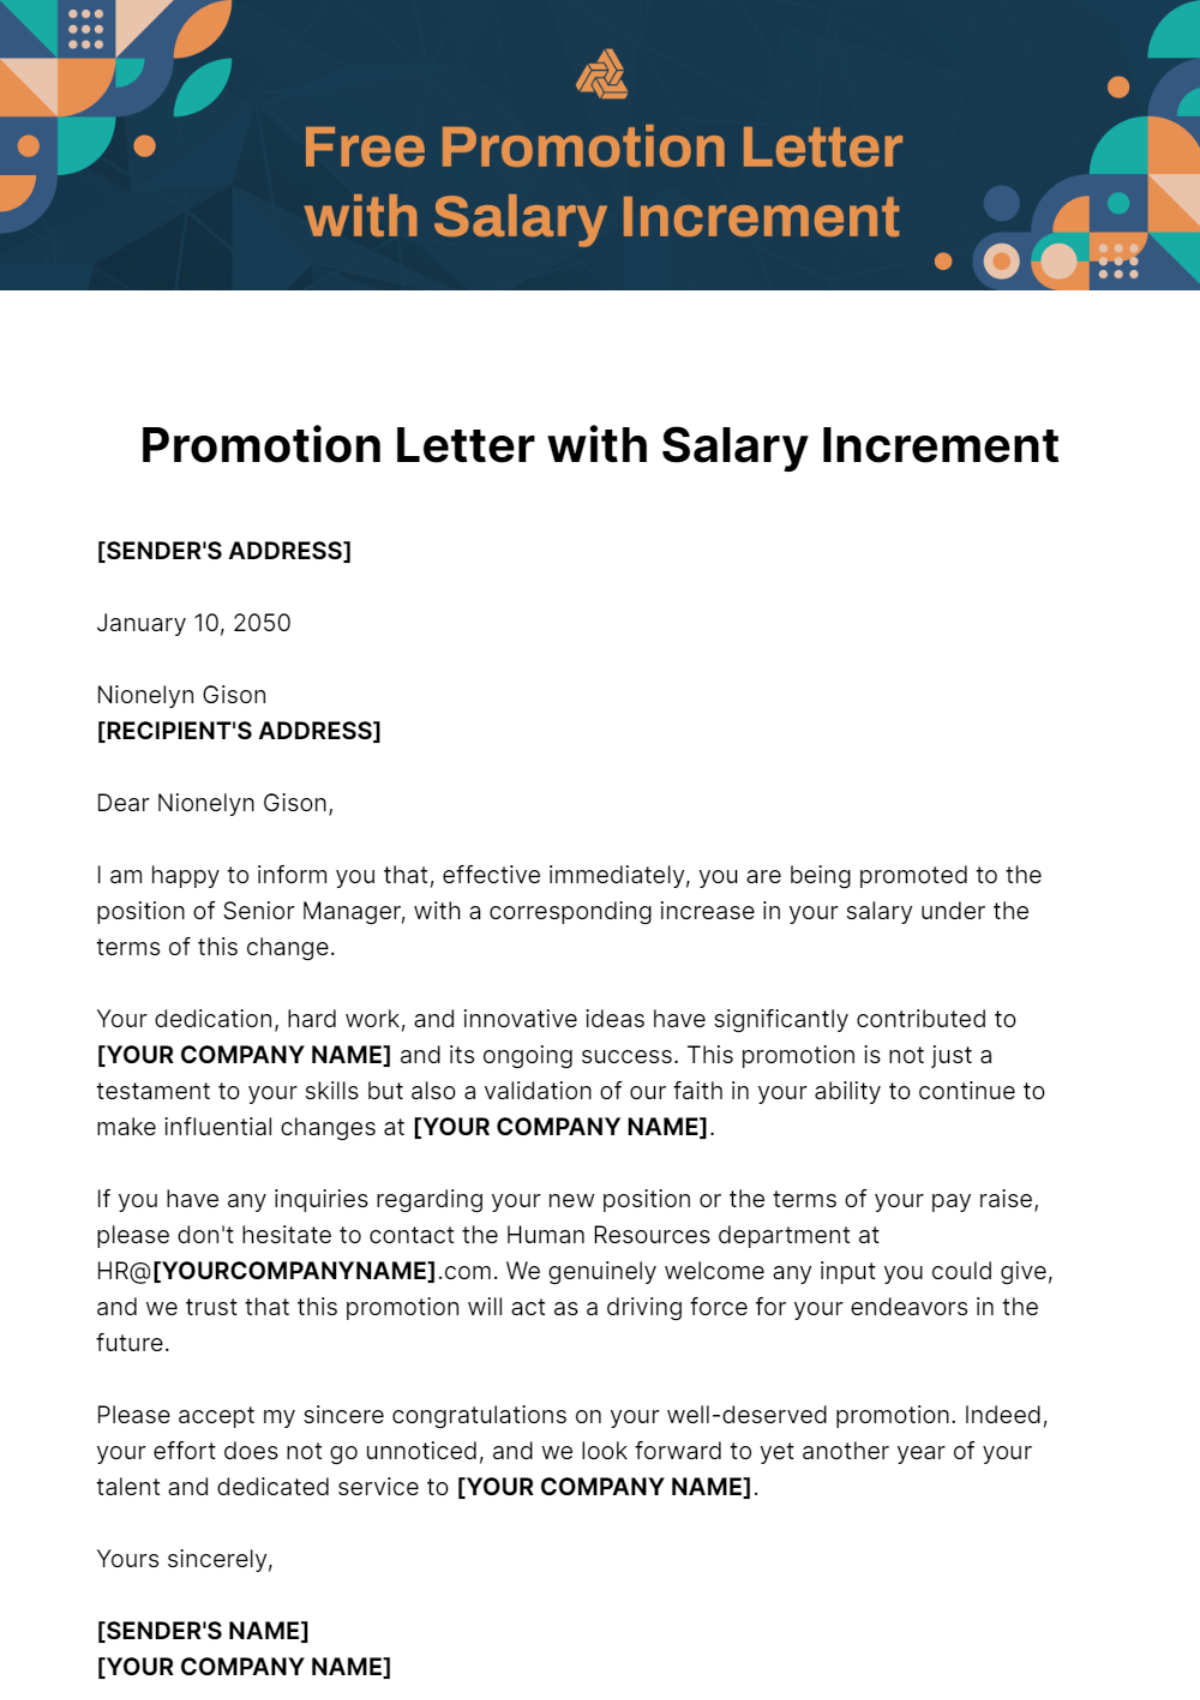 Free Promotion Letter with Salary Increment Template